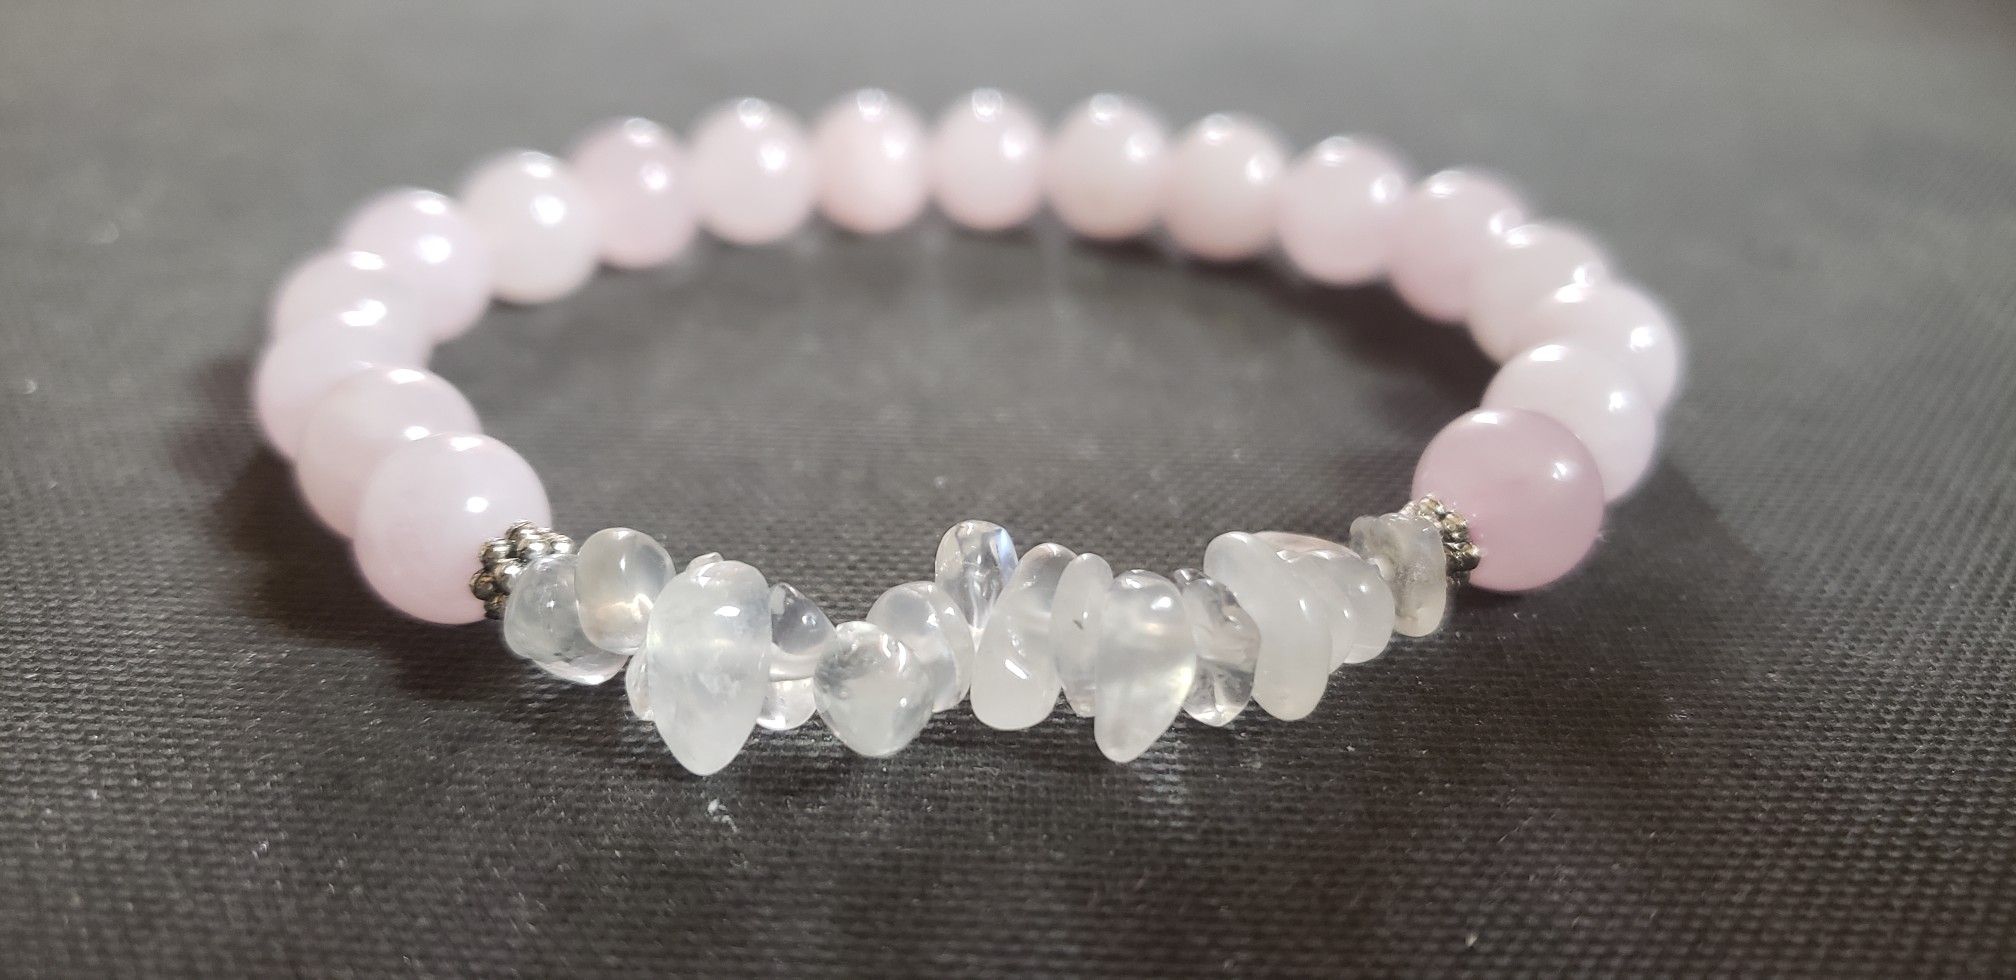 NATURAL Moonstone Rose Quartz Bracelet(healing,reduce stress,calm emotions,Success in Love & Business,Increase popularity, keep/attract love)